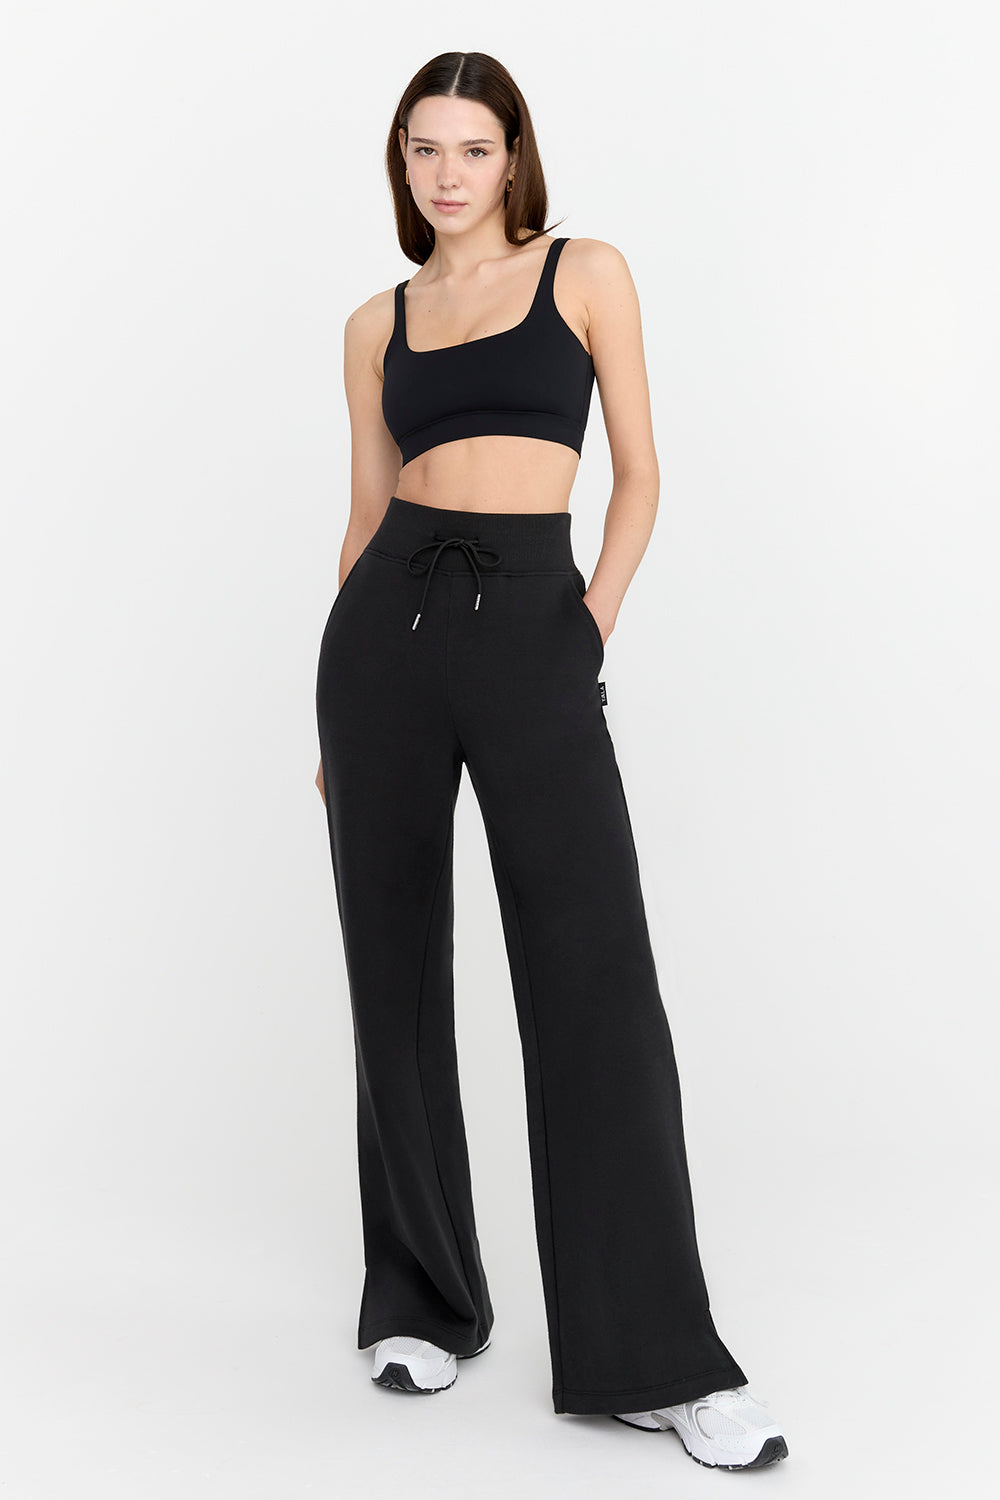 THE GYM PEOPLE Women's High Waist Loose Comfy Wide Leg Palazzo